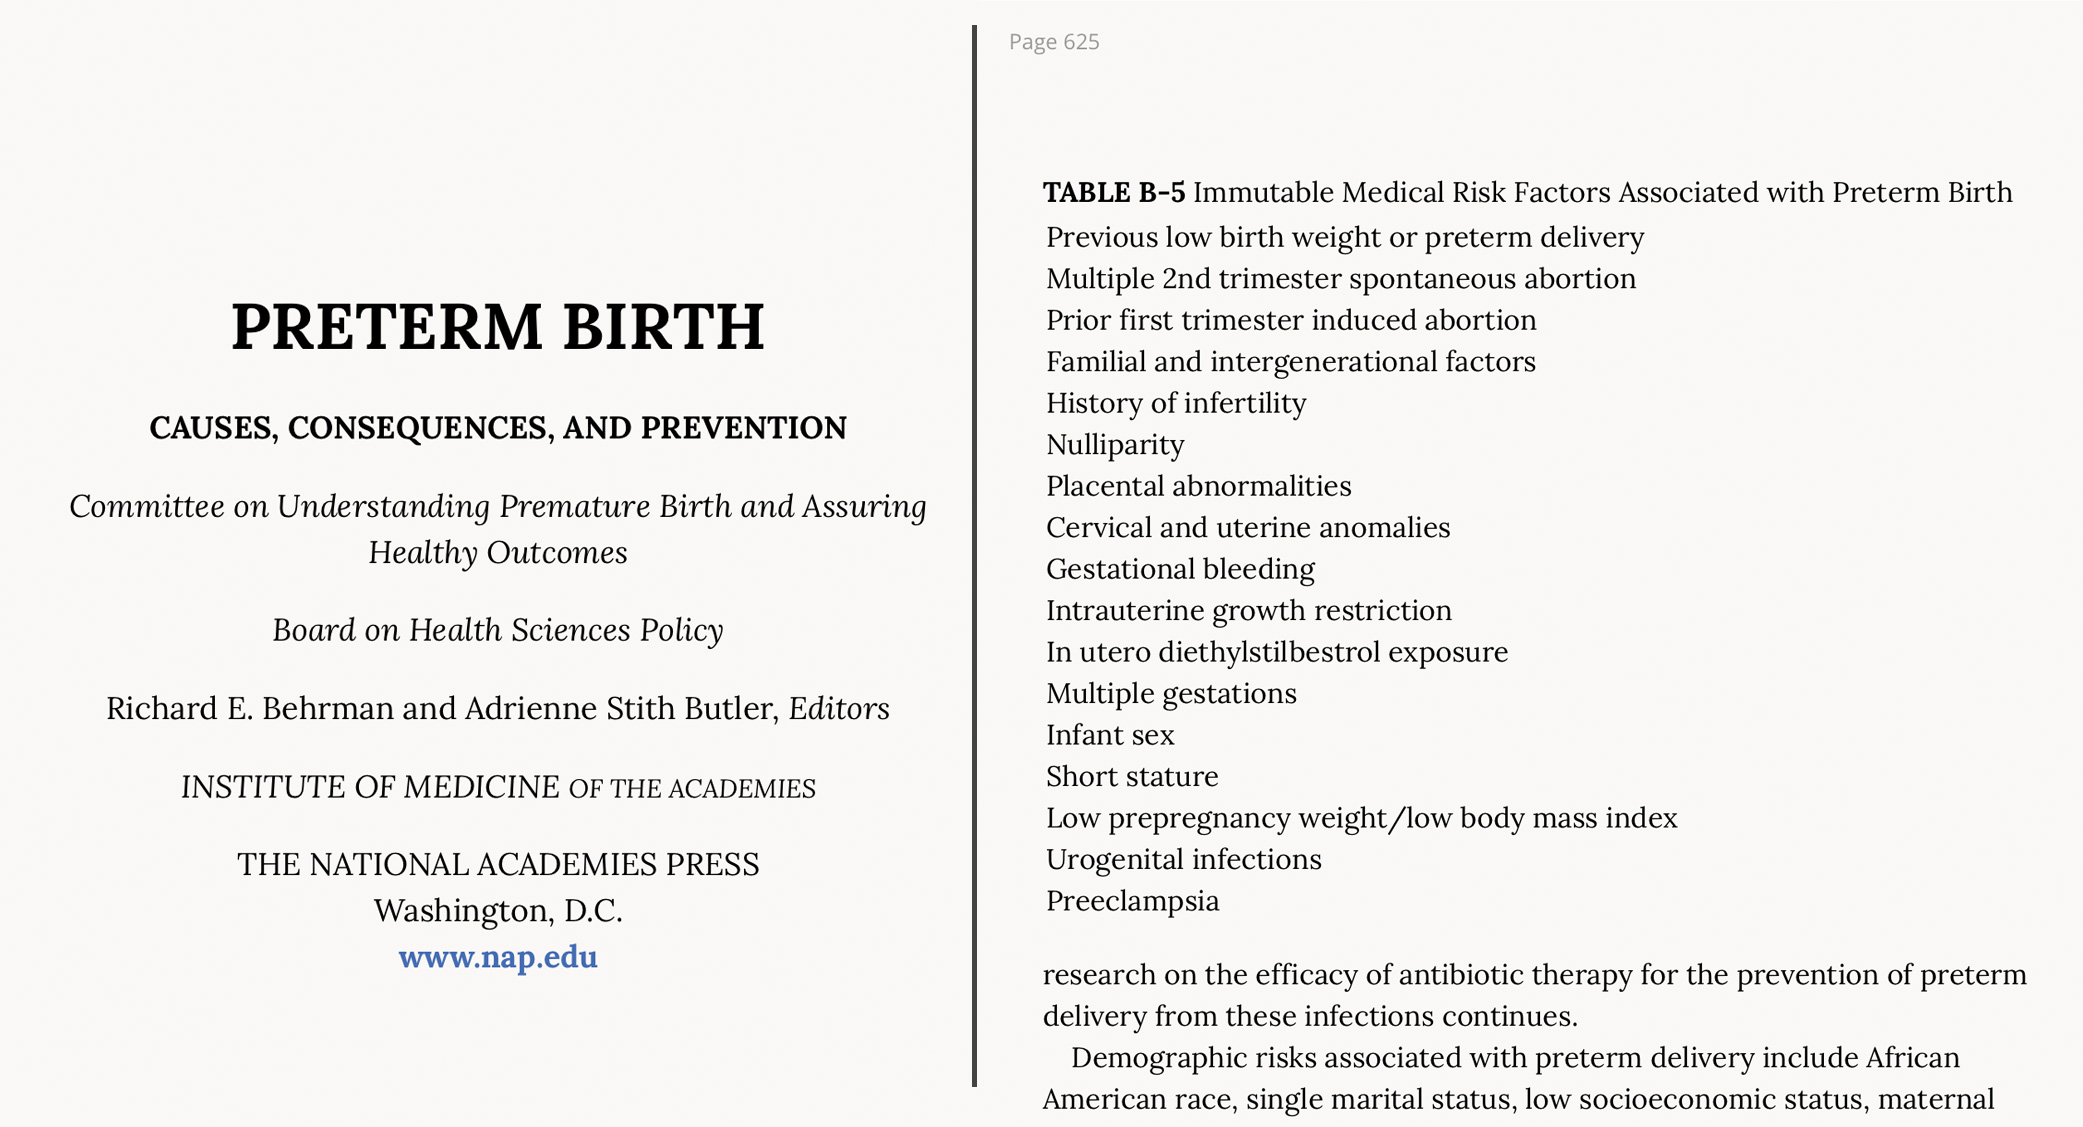 Institute of Medicine - Preterm Births and Induced Abortion